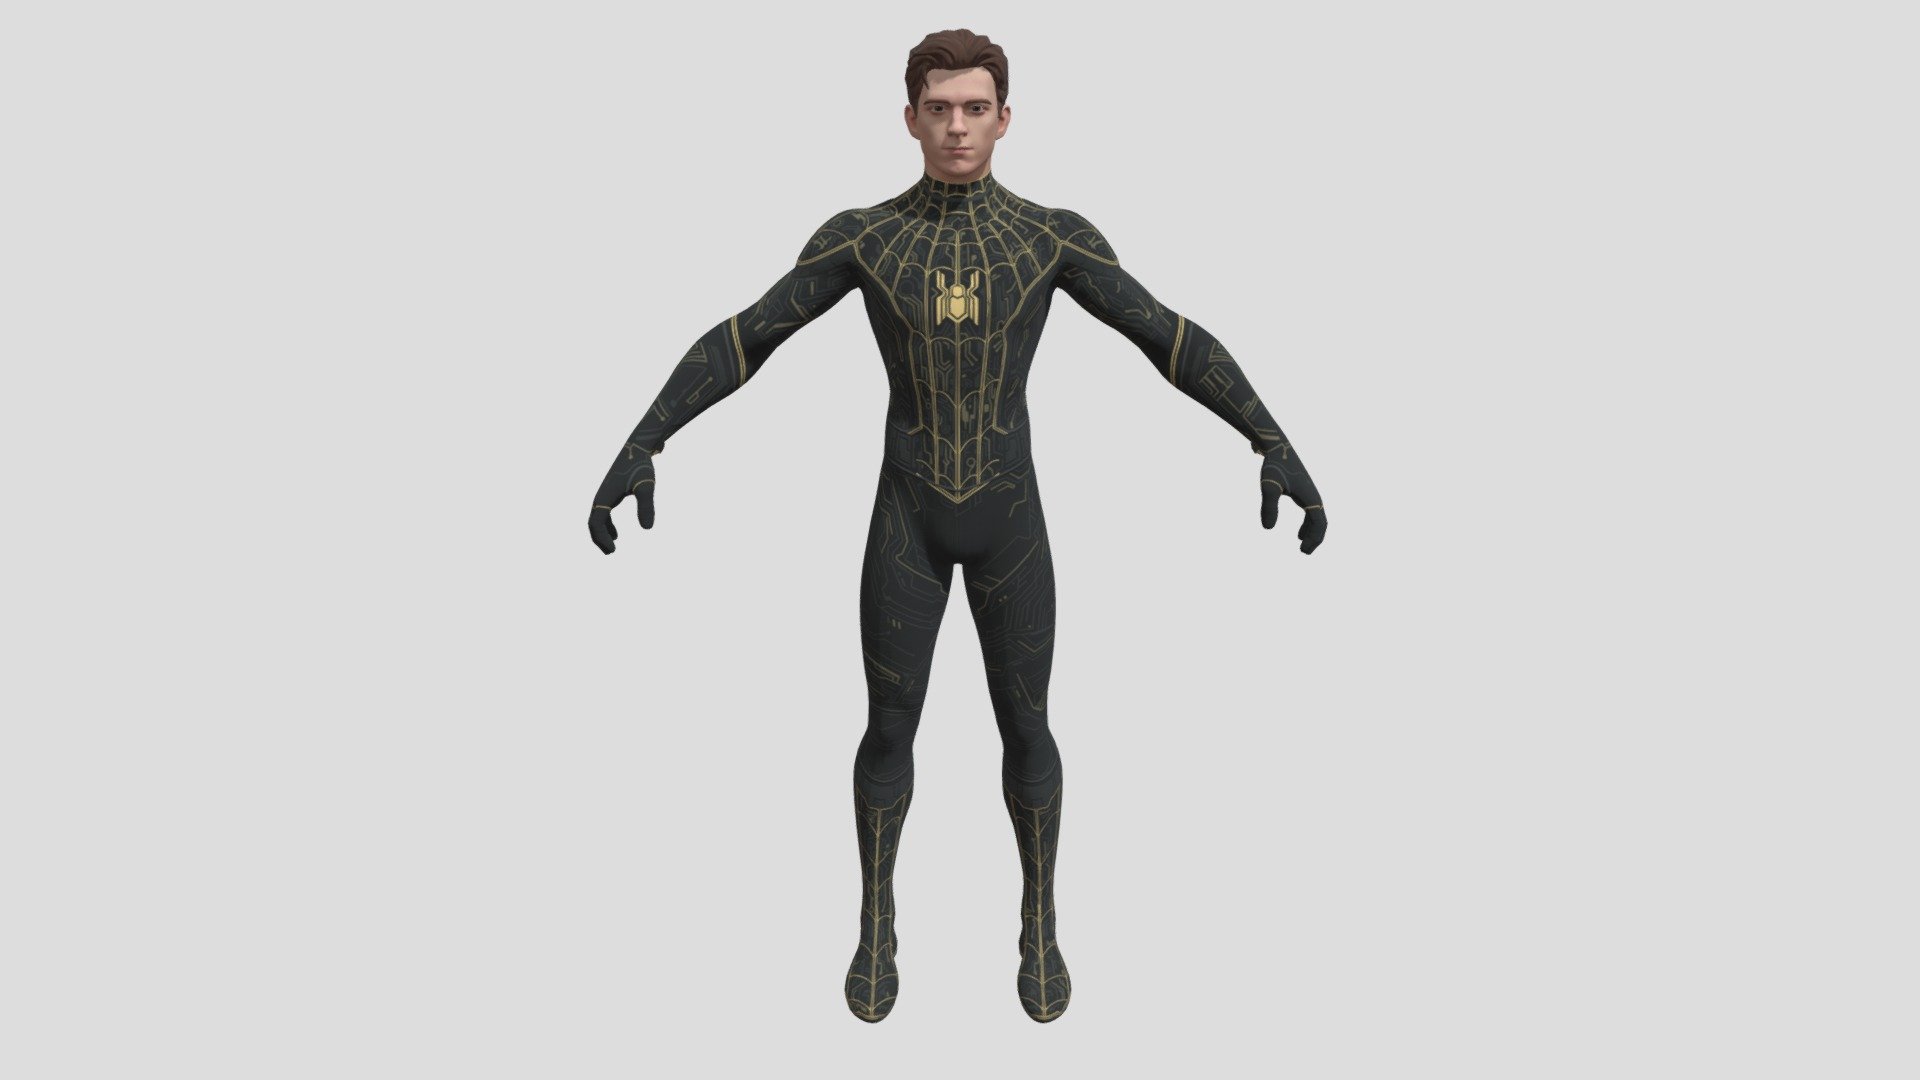 Fortnite: Spiderman No Way Home Peter Parker (Black Suit) 3D Model free download for Unity and Unreal Engine!!!!!!!!!!!!!!!!!!

MY CODE CREATOR IN FORTNITE: TEAMEW

FIND ME ON YOUTUBE: E.W. amazing games - Fortnite: No Way Home Peter Parker (Black Suit) - Download Free 3D model by EWTube0 3d model